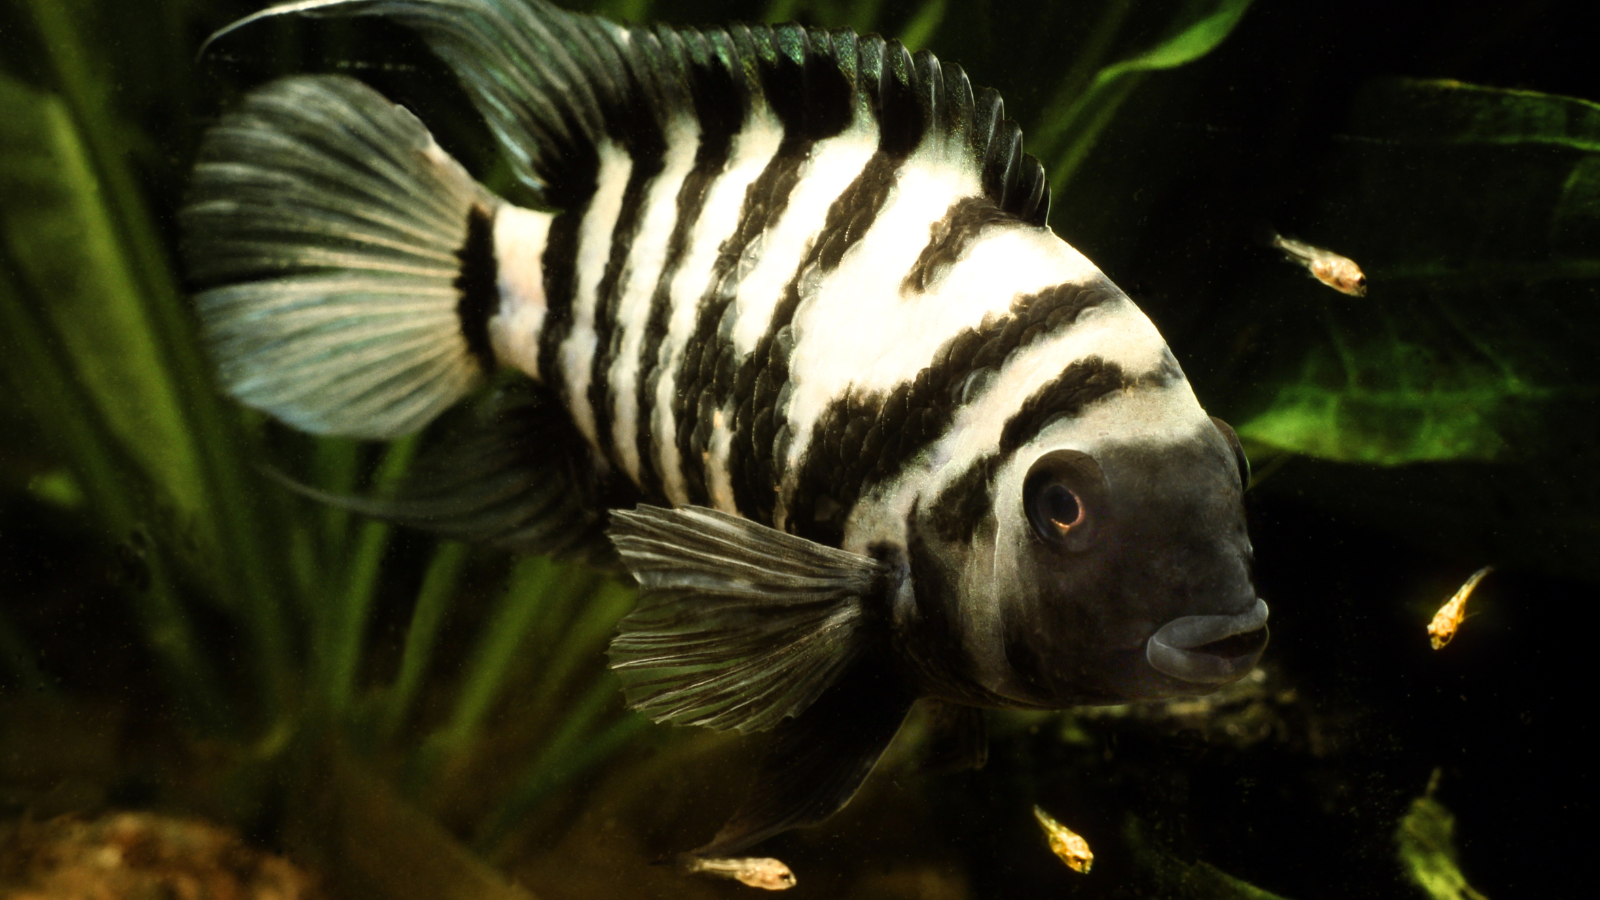 Convict Cichlids are a great species for someone looking to try a little larger fish.